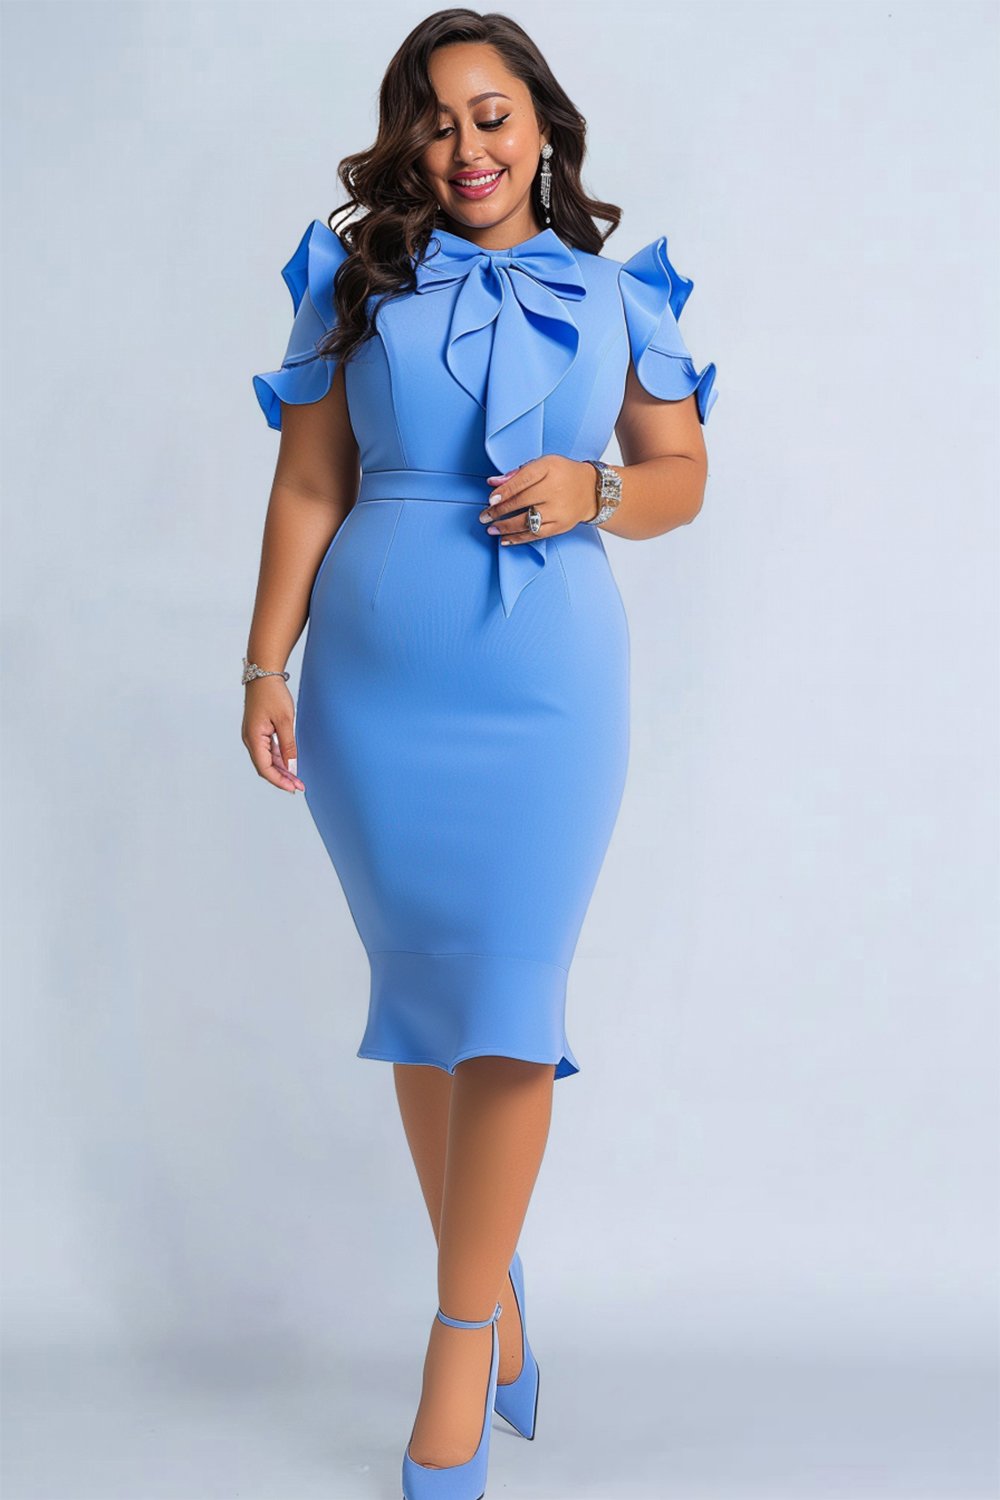 Xpluswear Design Plus Size Business Casual Blue Short Sleeve Ruffle Bow Tie Knitted Midi Dresses [Pre-Order]